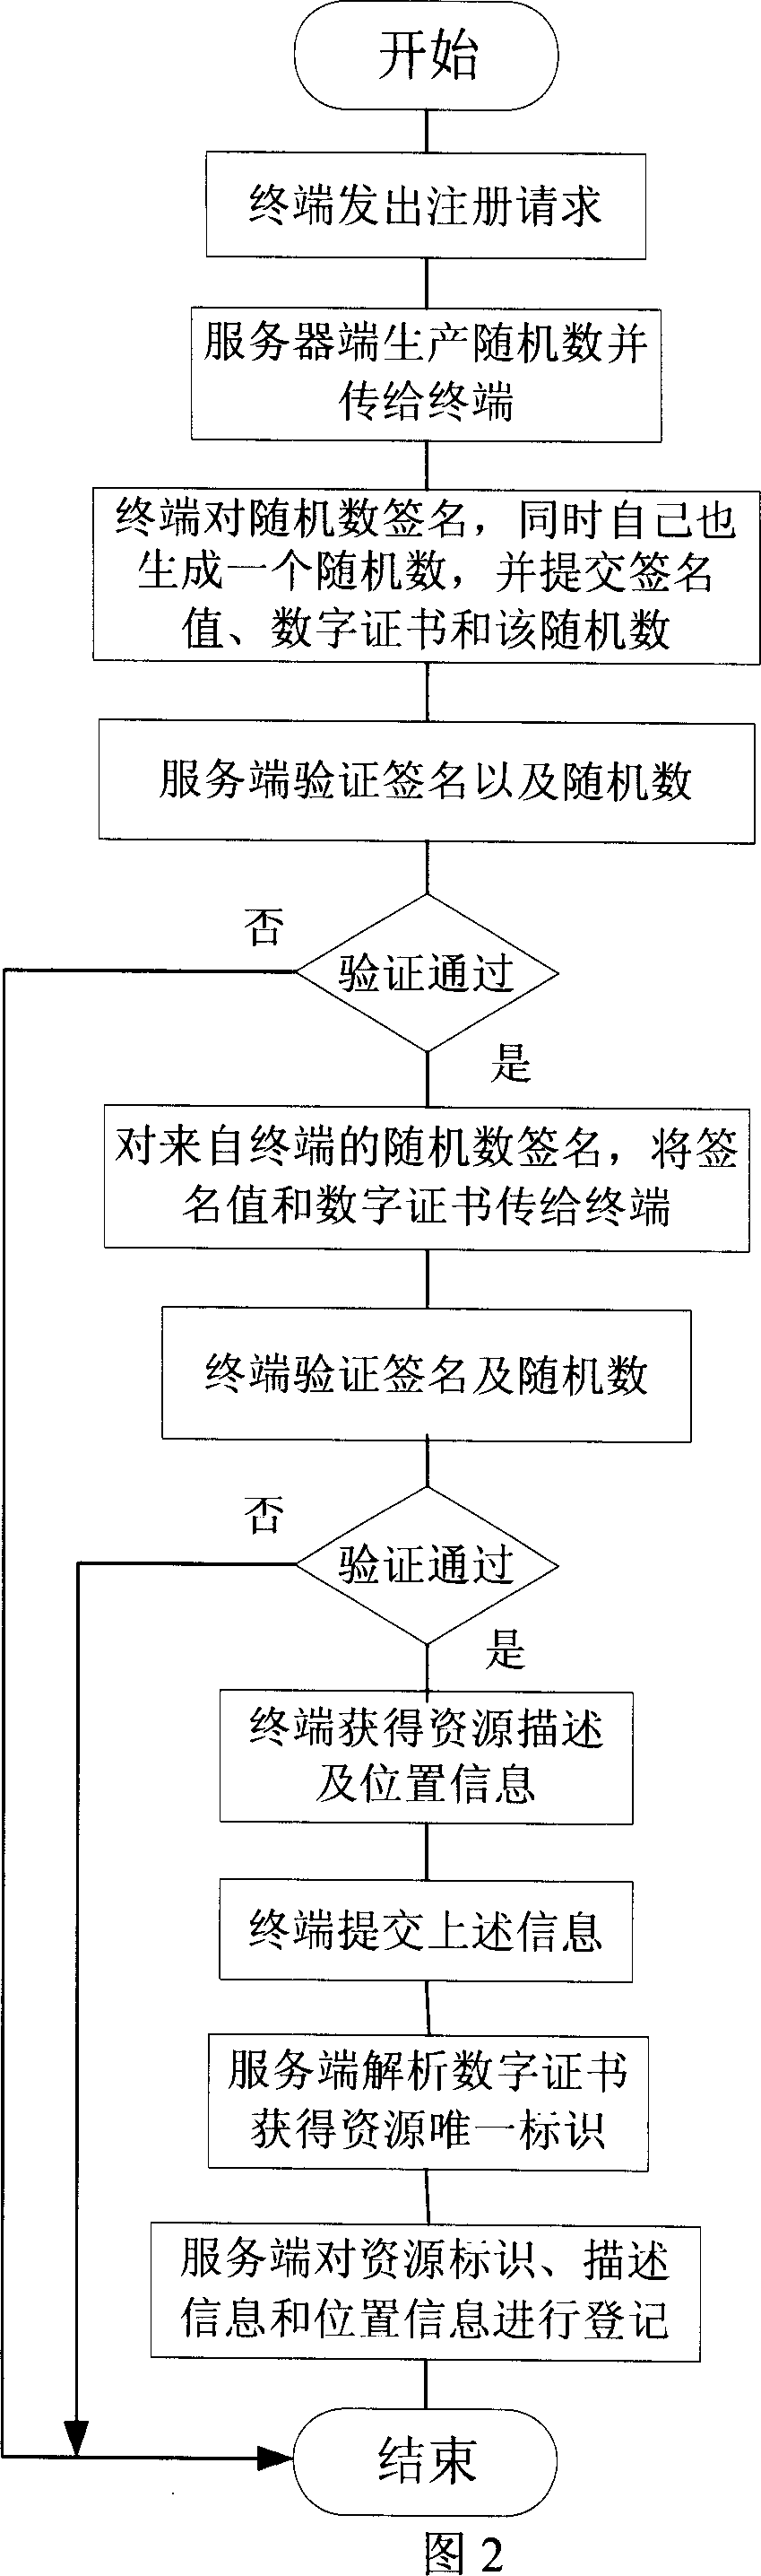 Network resource integration access method based on registration and authentication